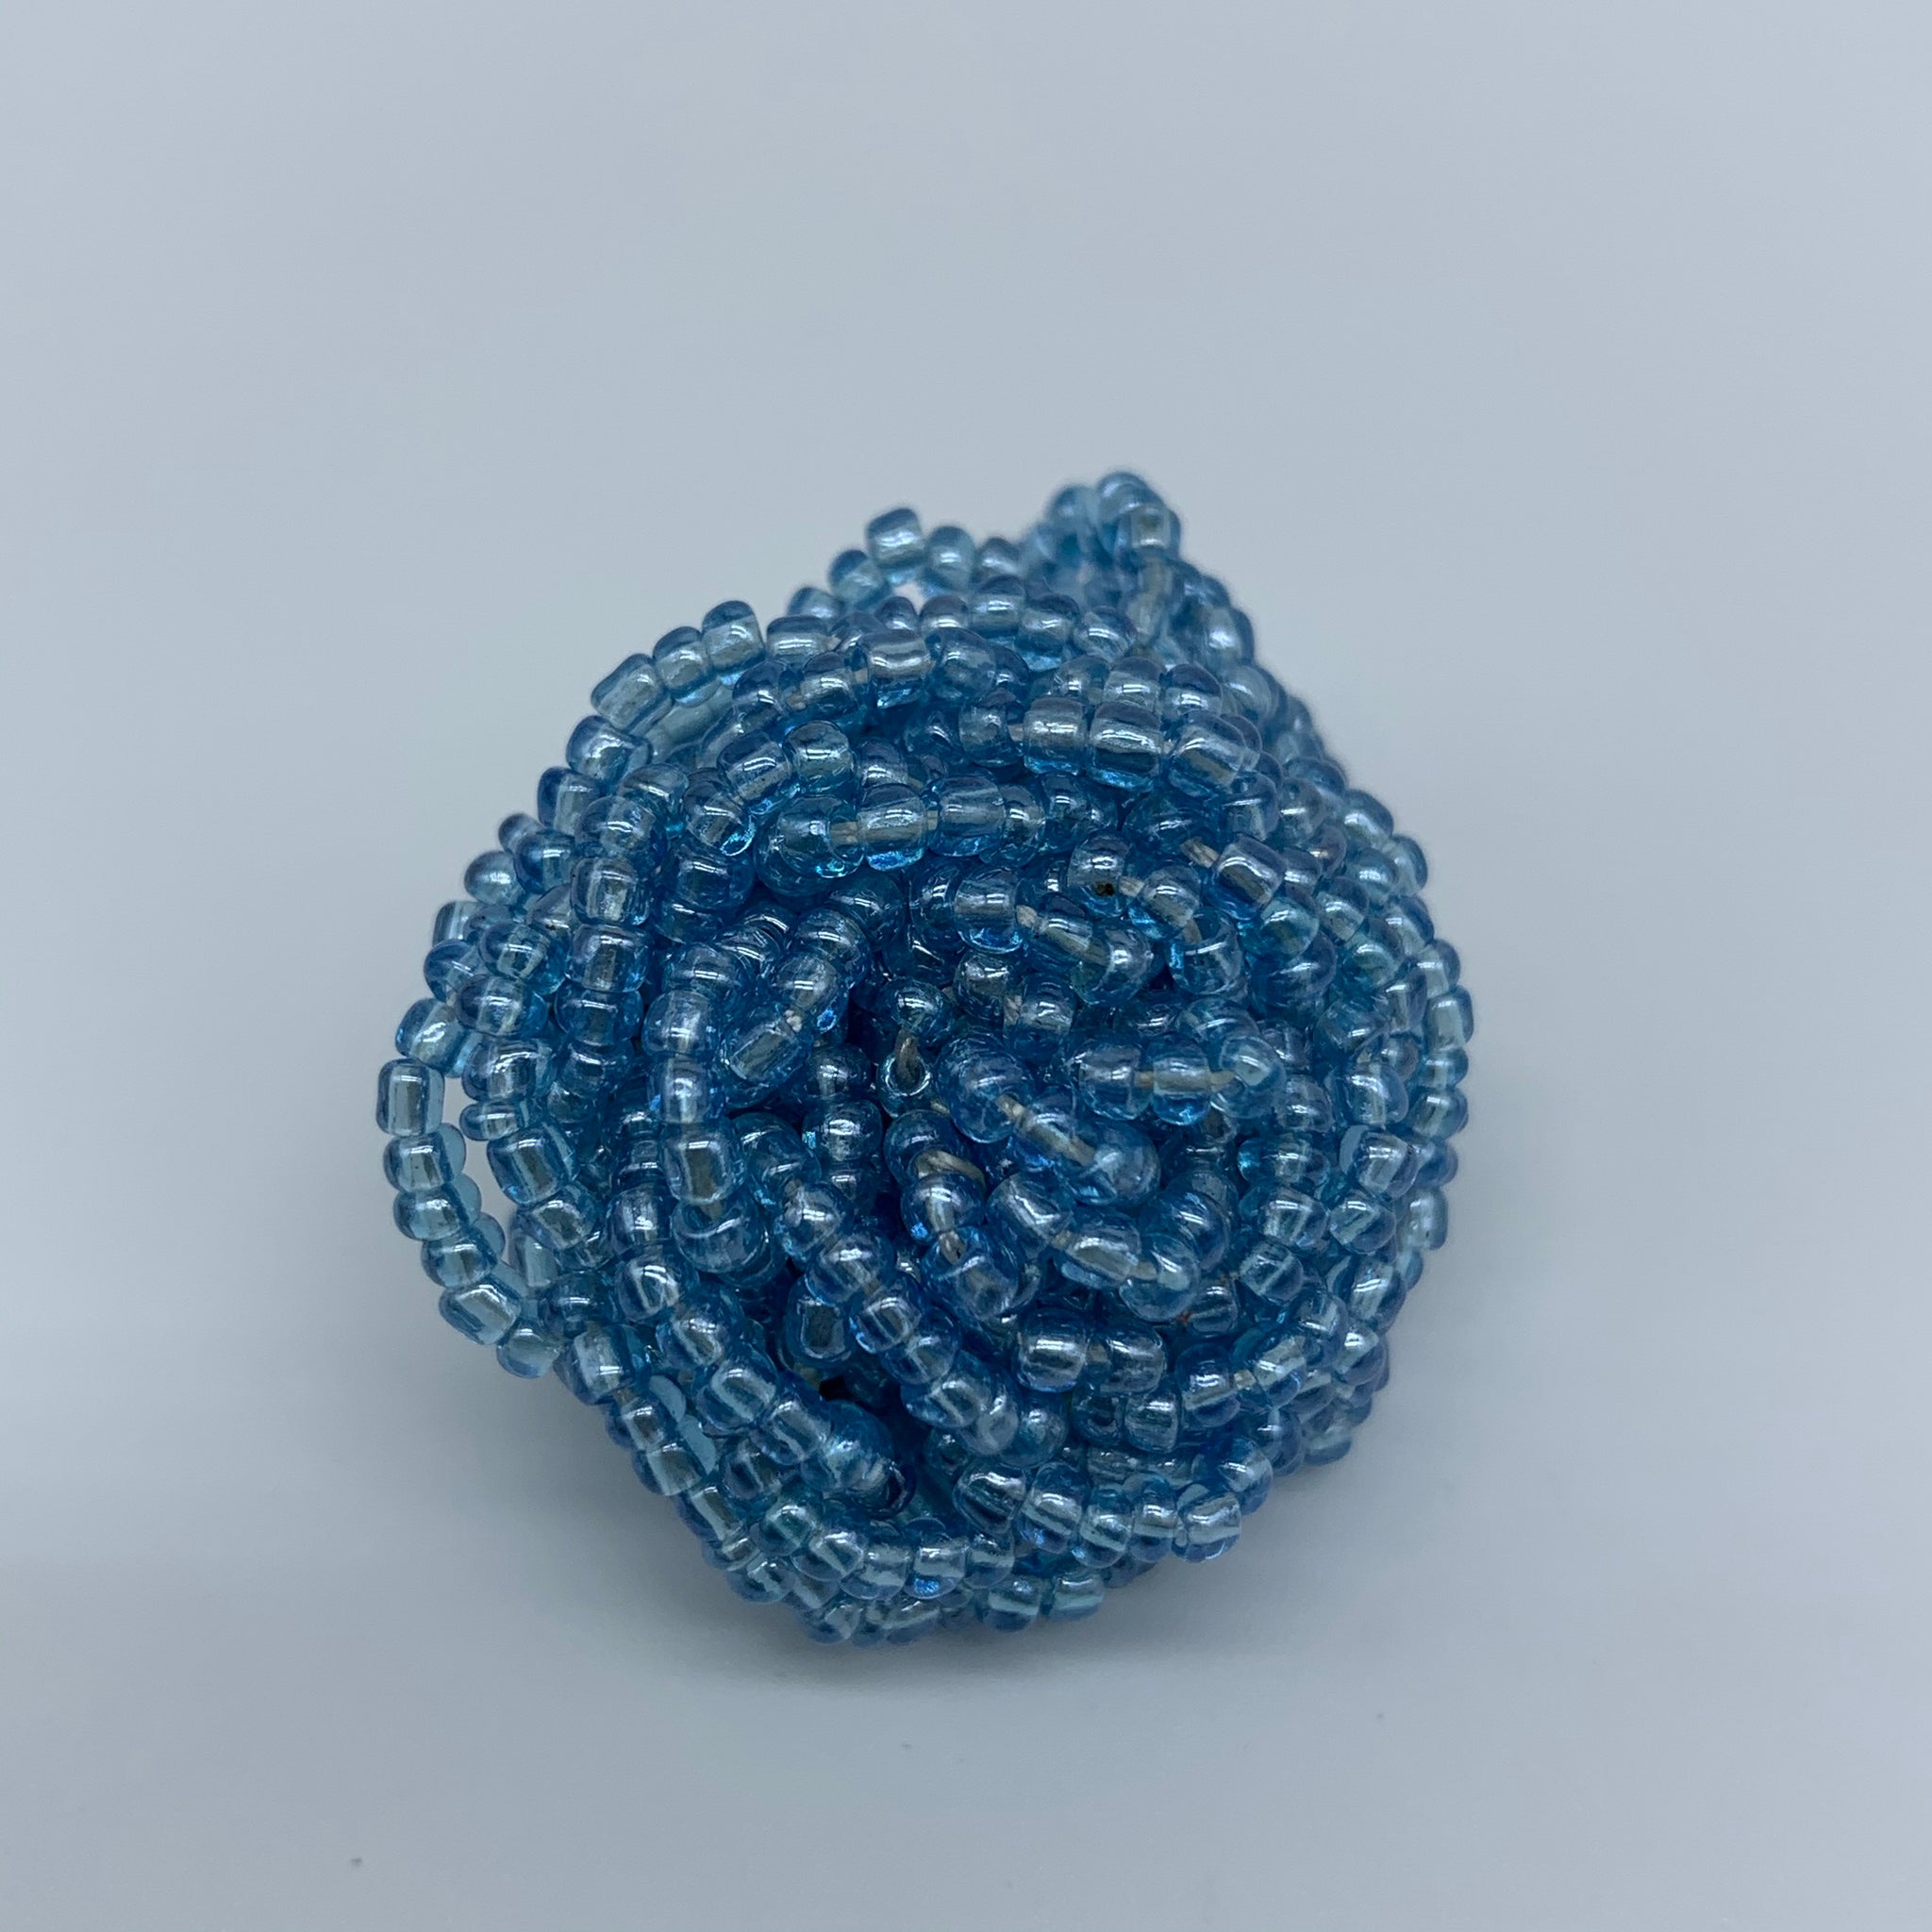 Beaded Ring-Blue Variation 2 - Lillon Boutique